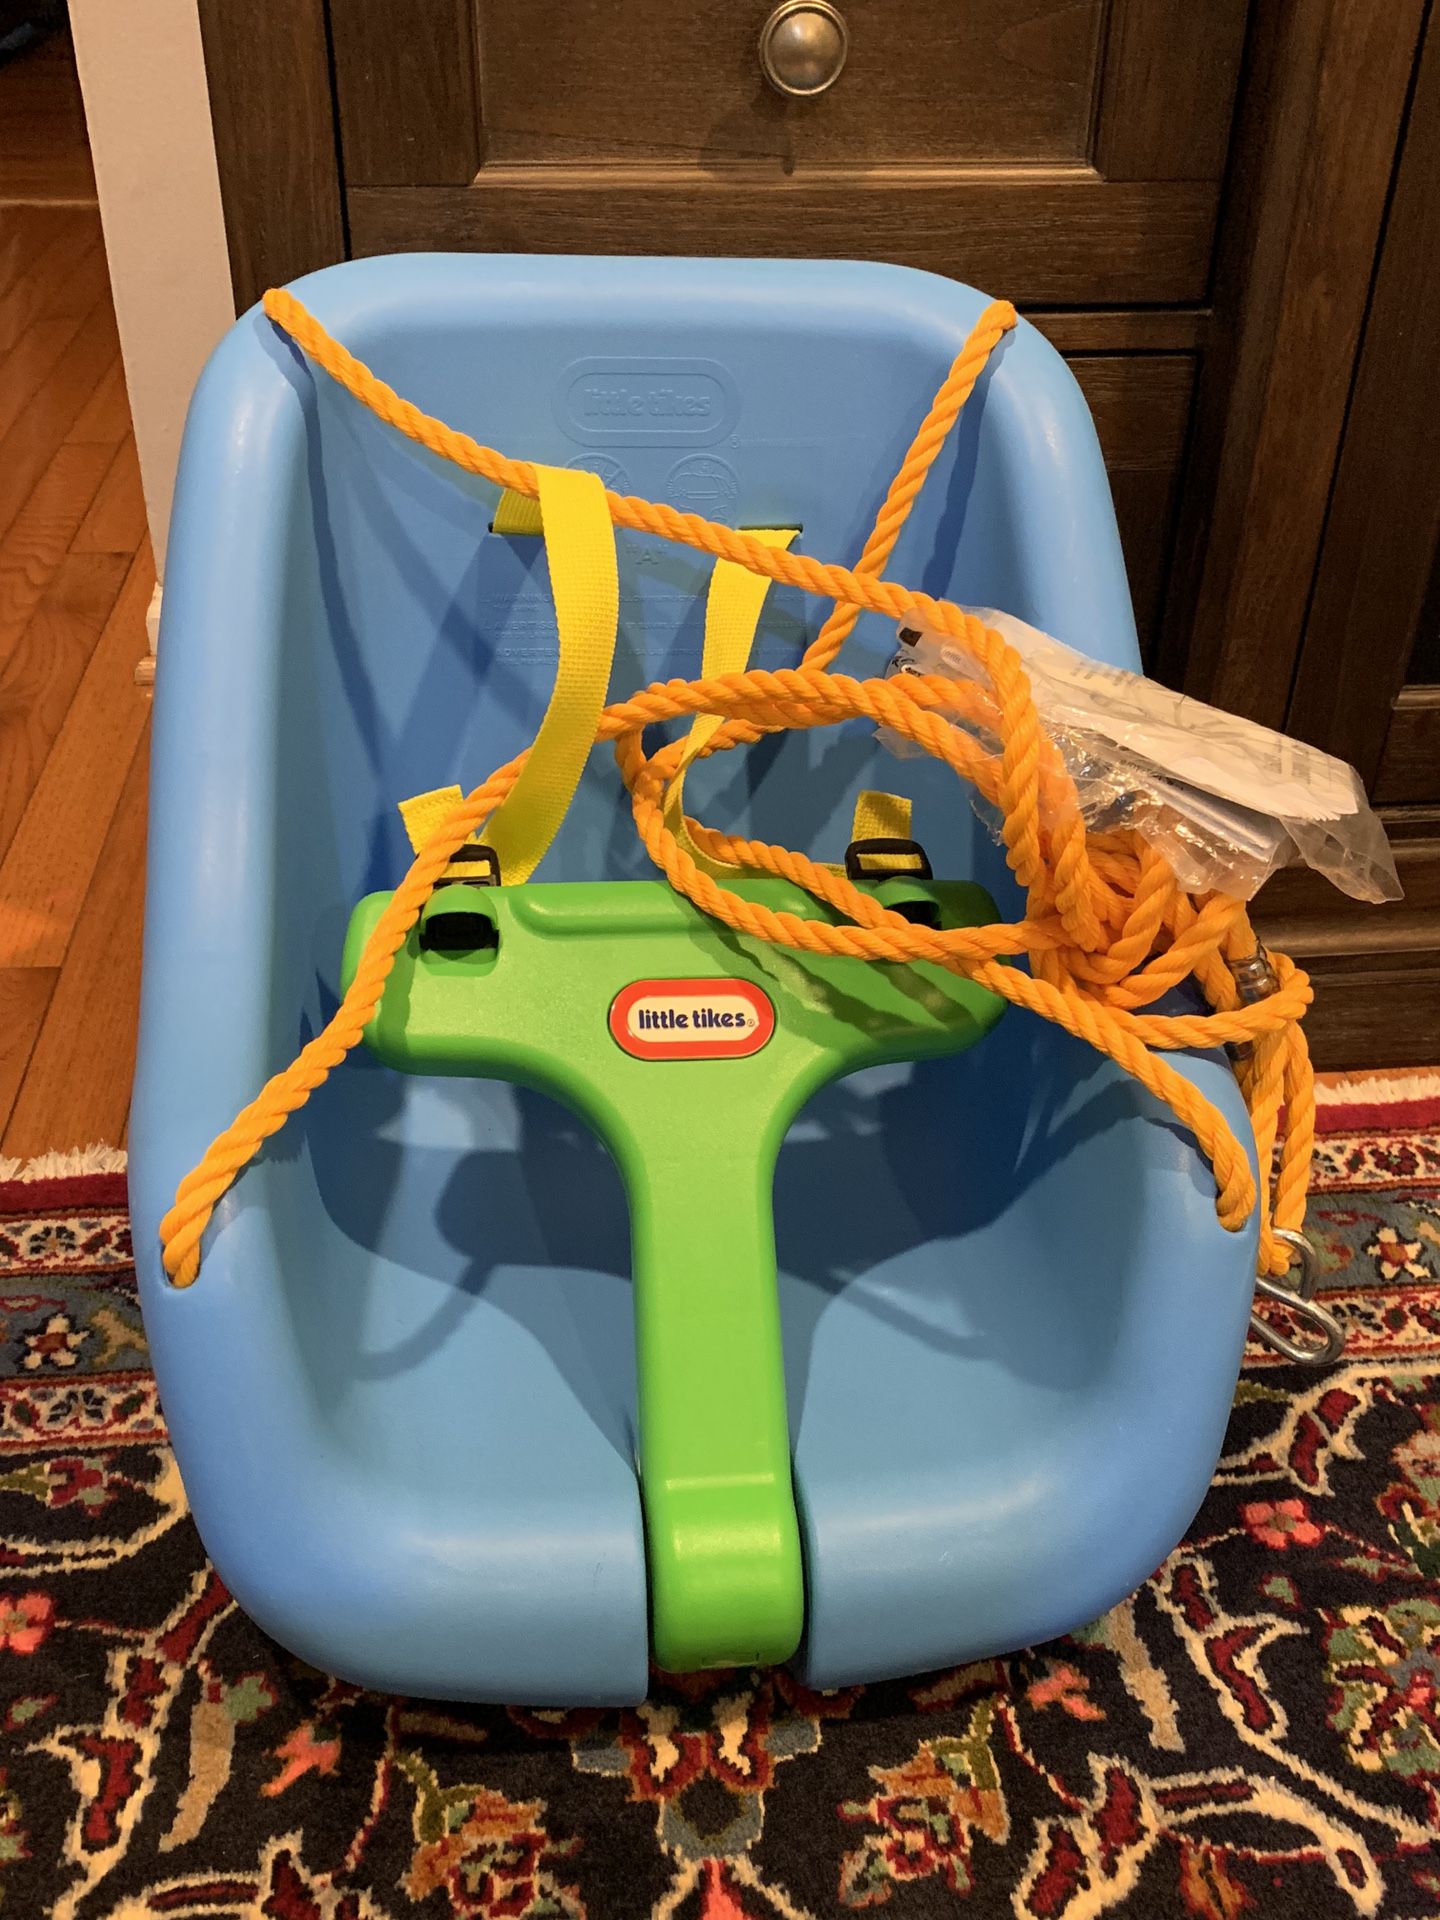 Little tikes swing brand new never used